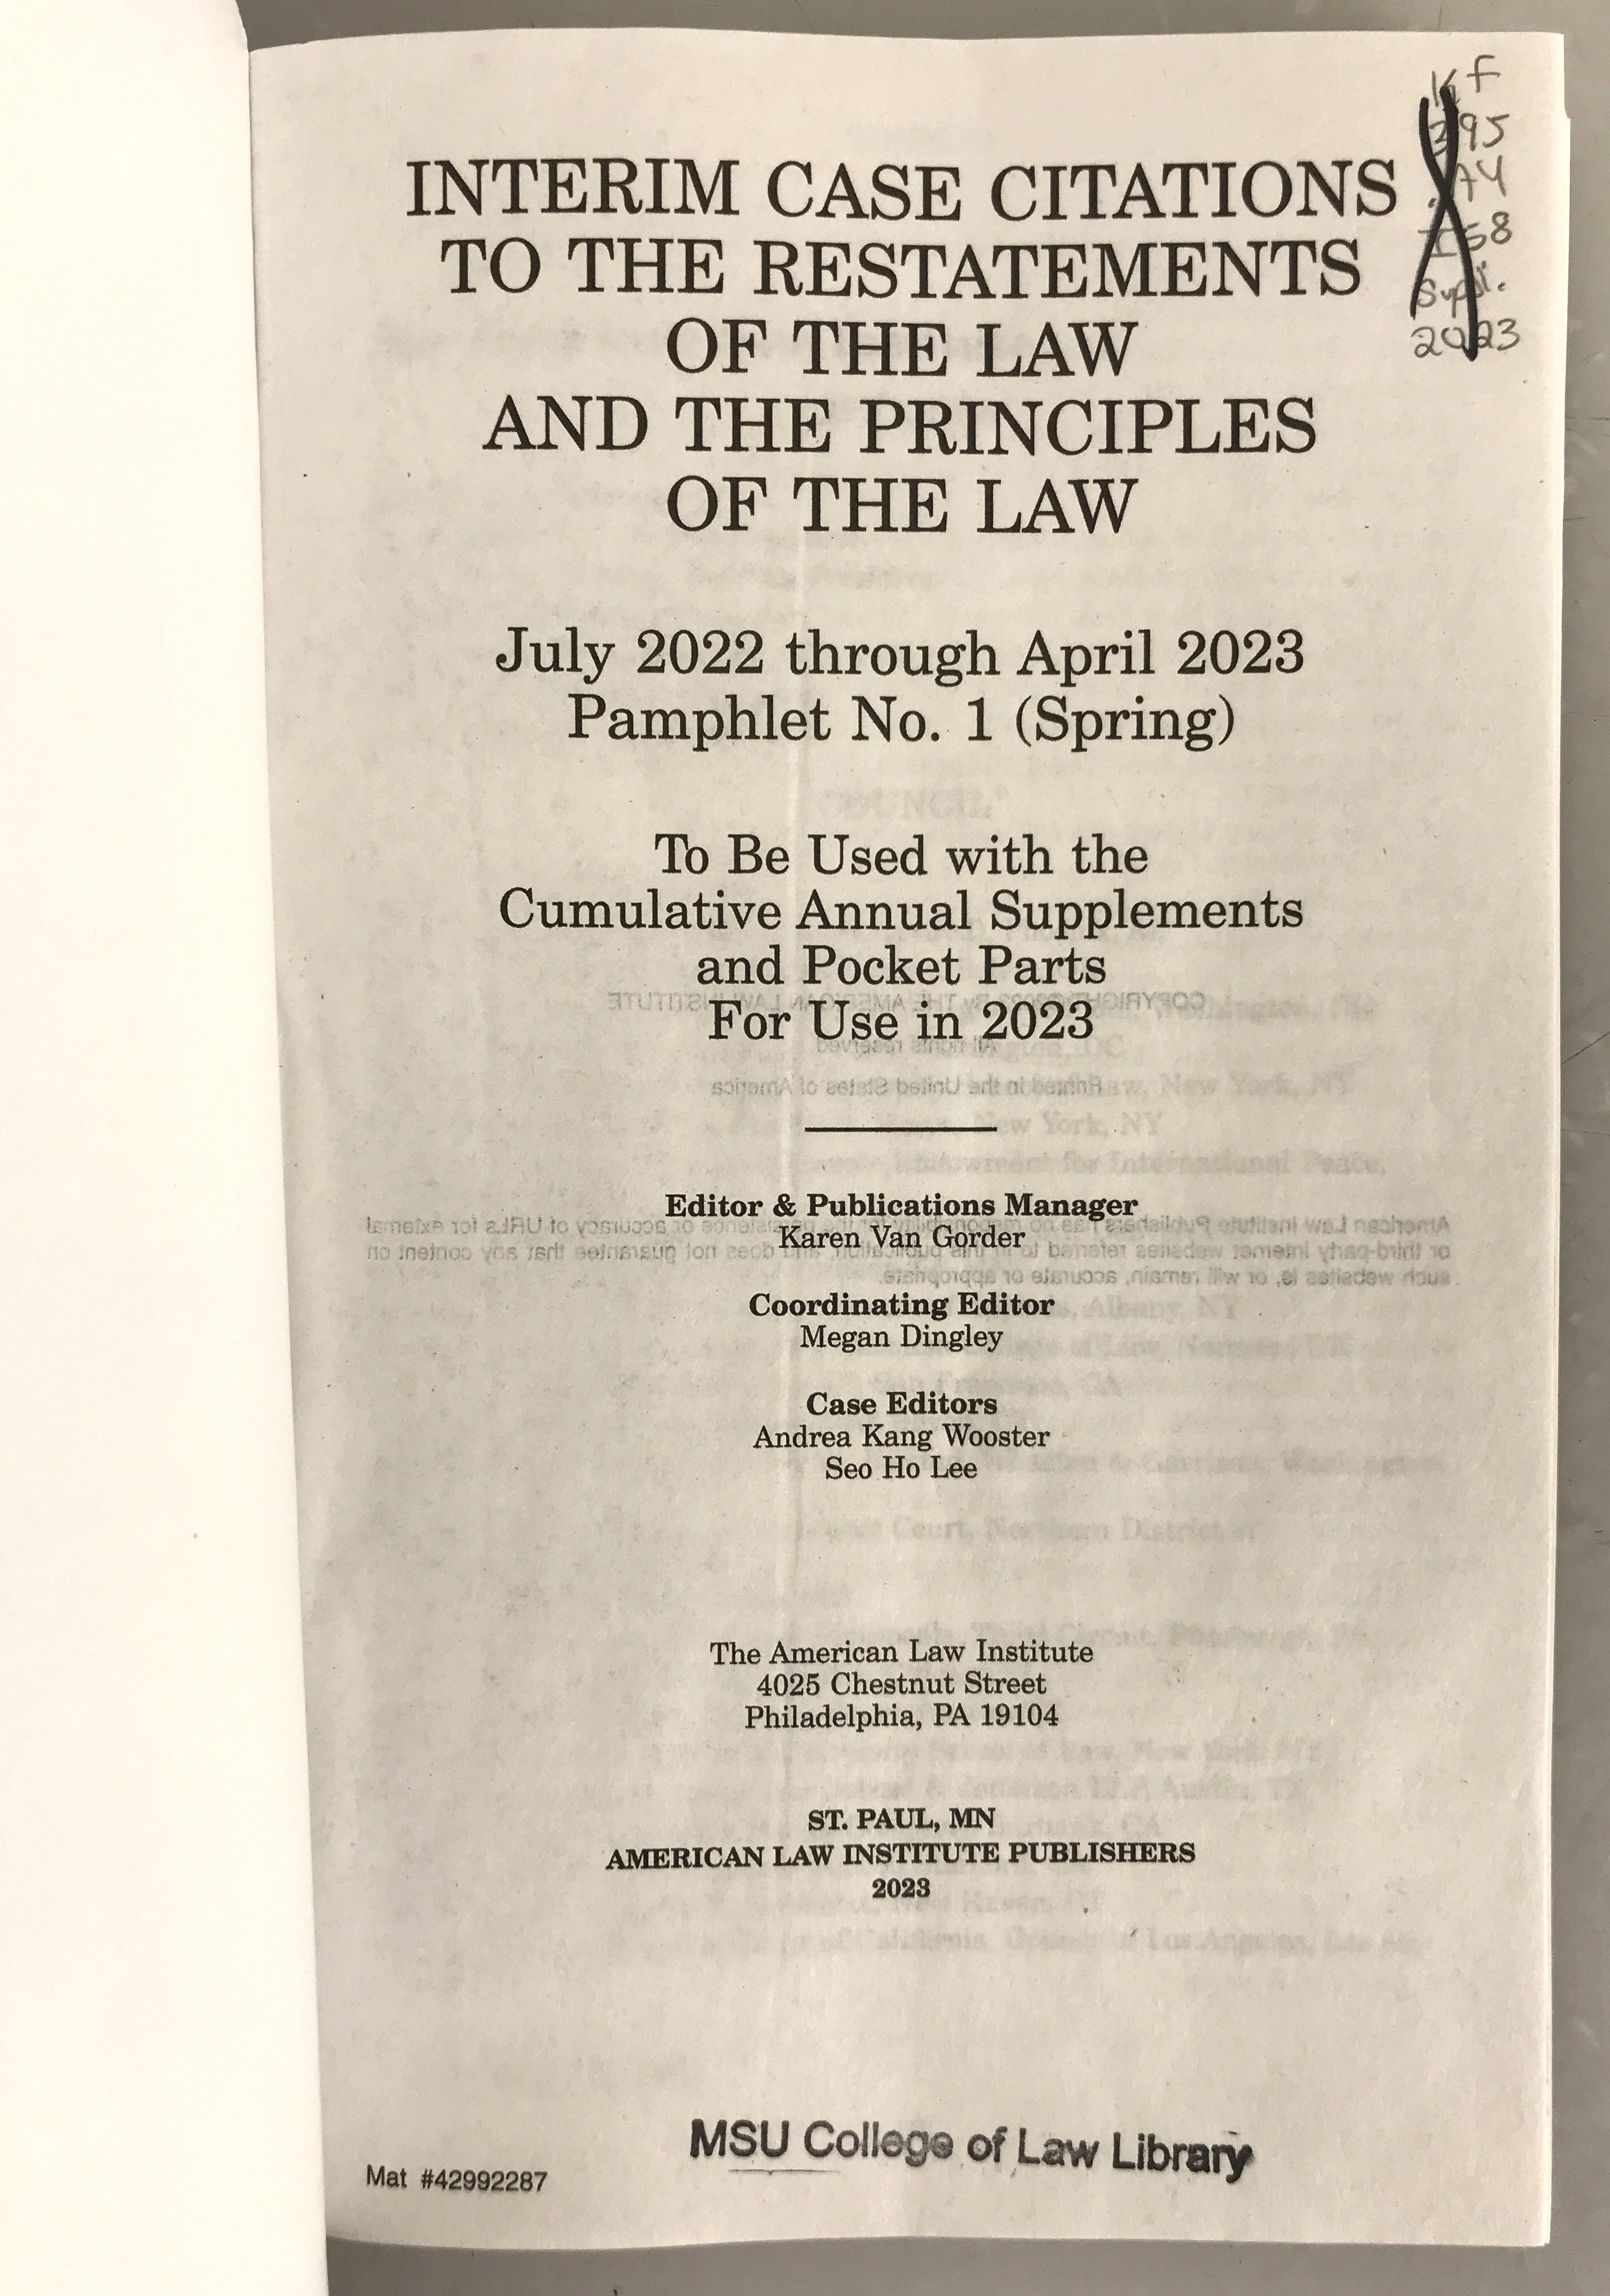 American Law Institute Interim Case Citations to the Restatements of the Law and the Principles of the Law July 2022-April 2023 SC